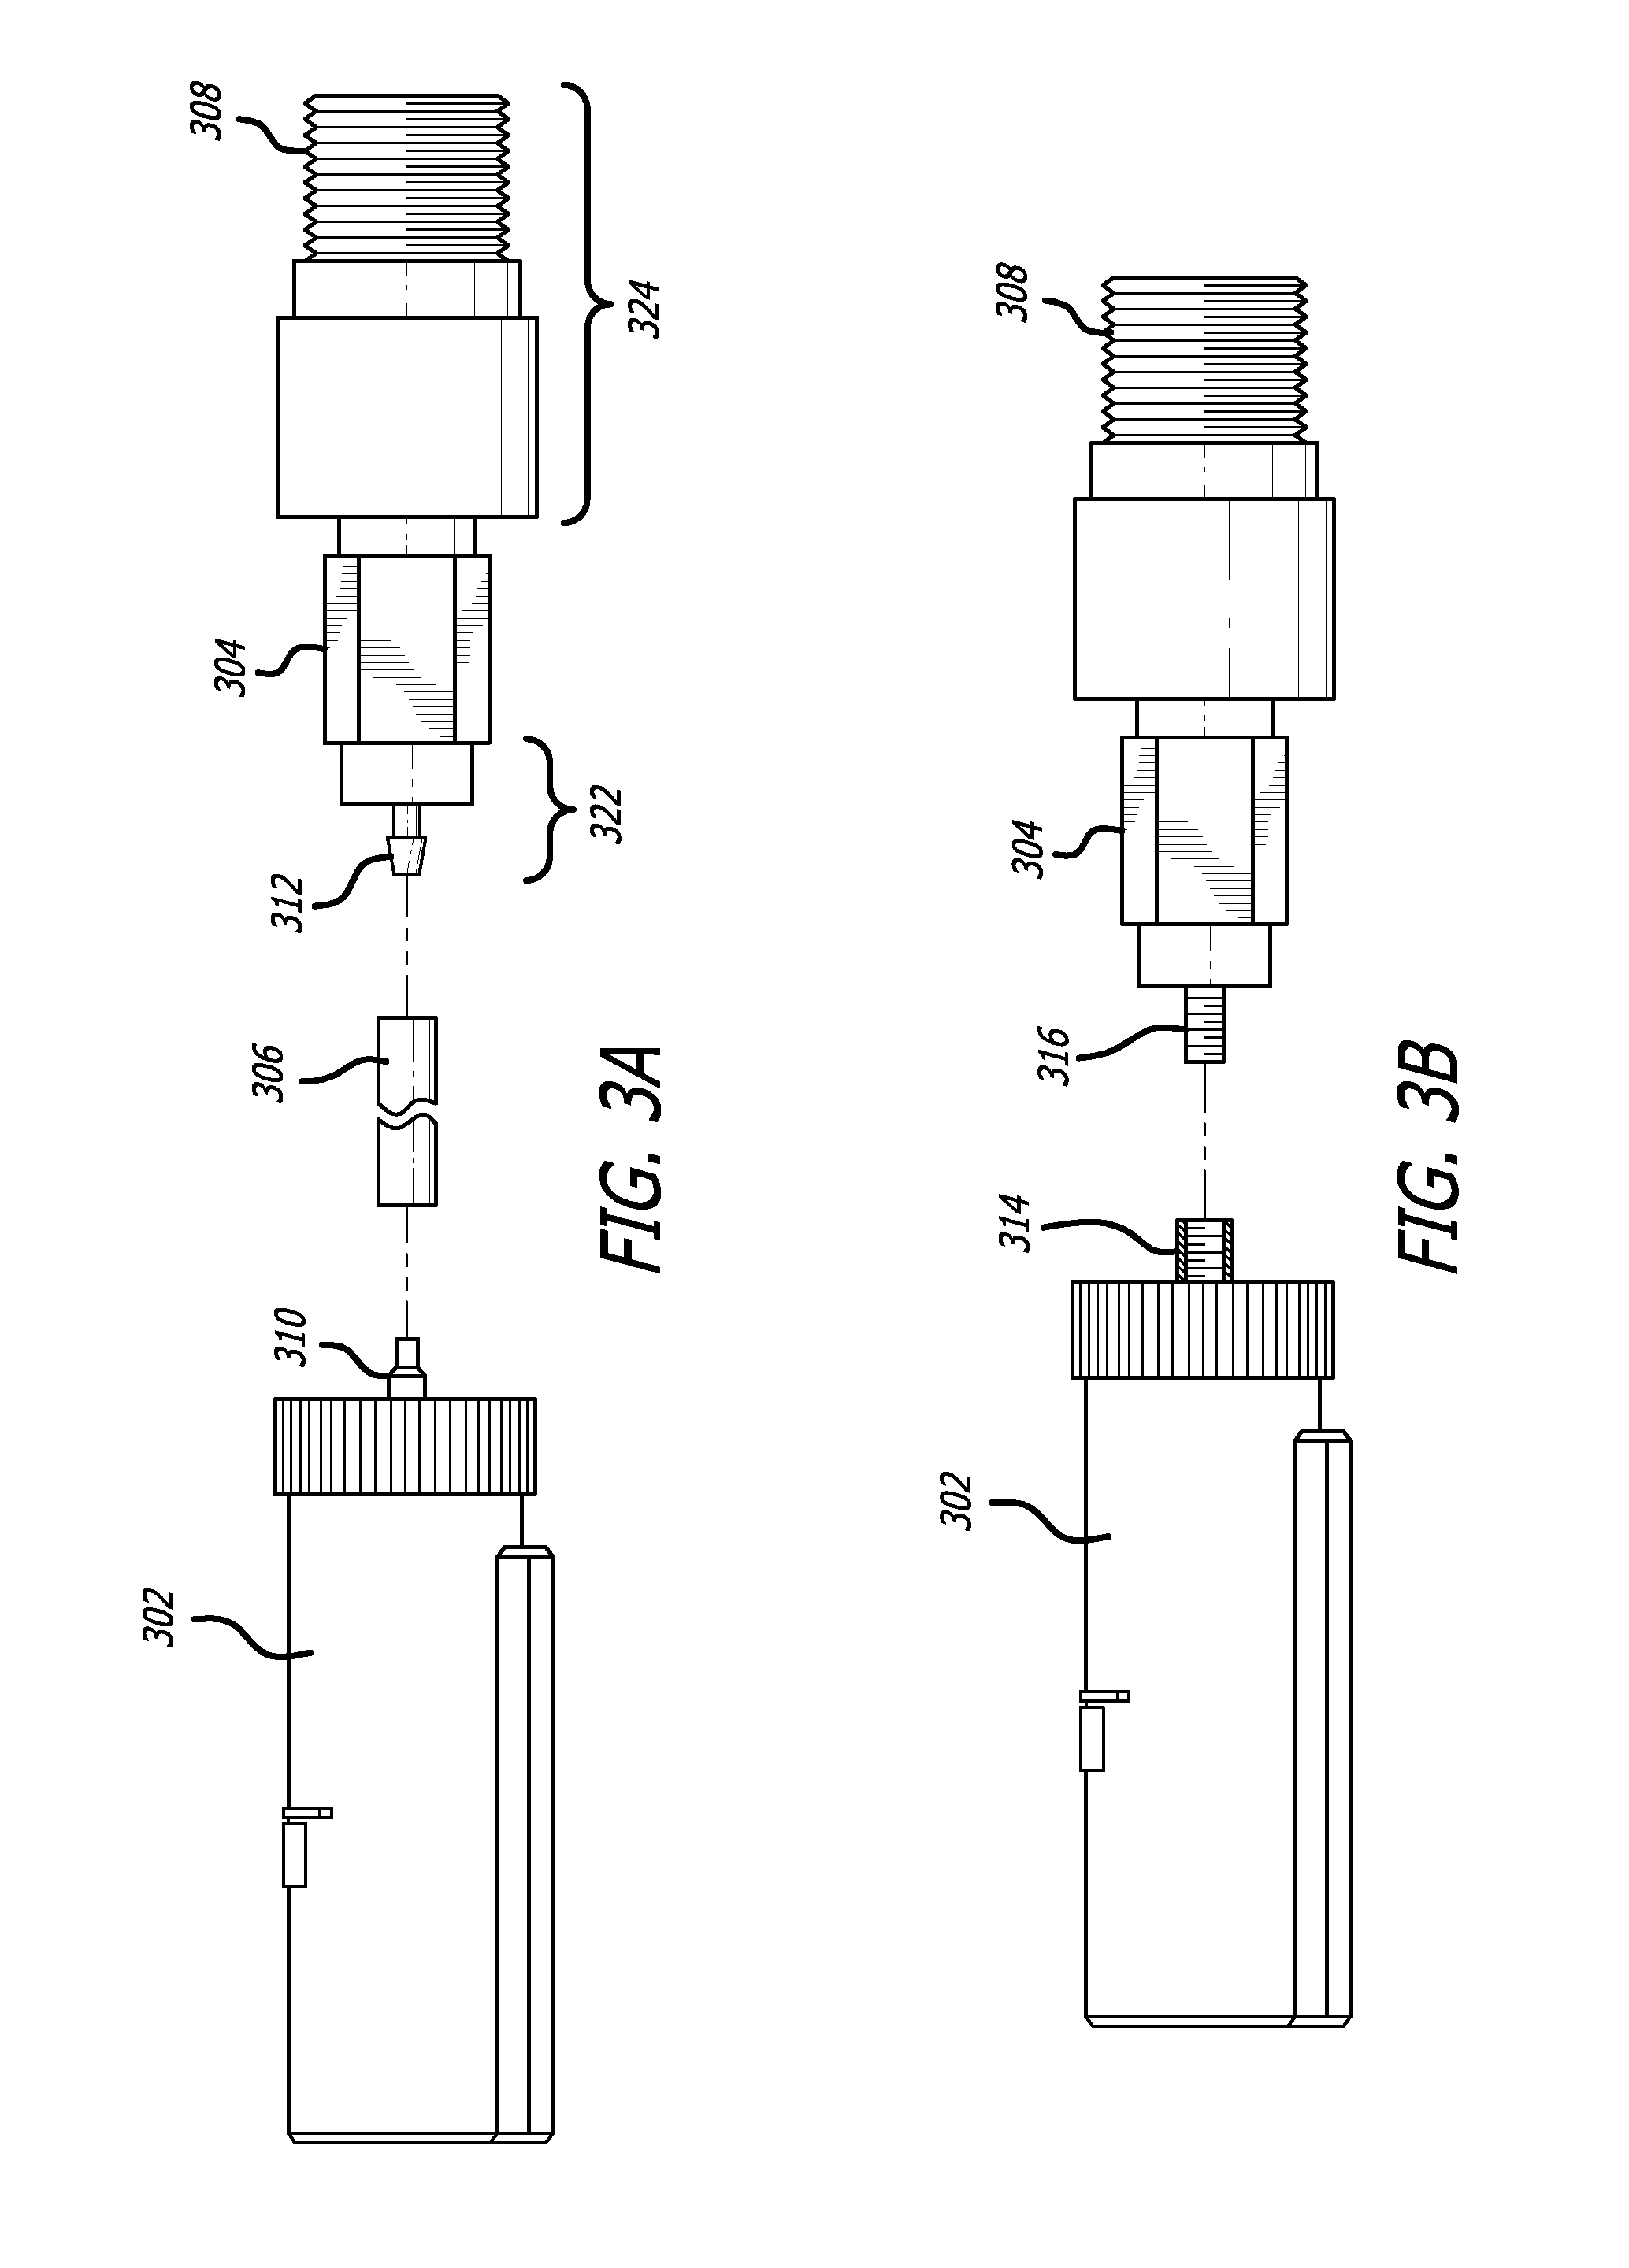 Method of producing substances with supersaturated gas, transdermal delivery device thereof, and uses thereof